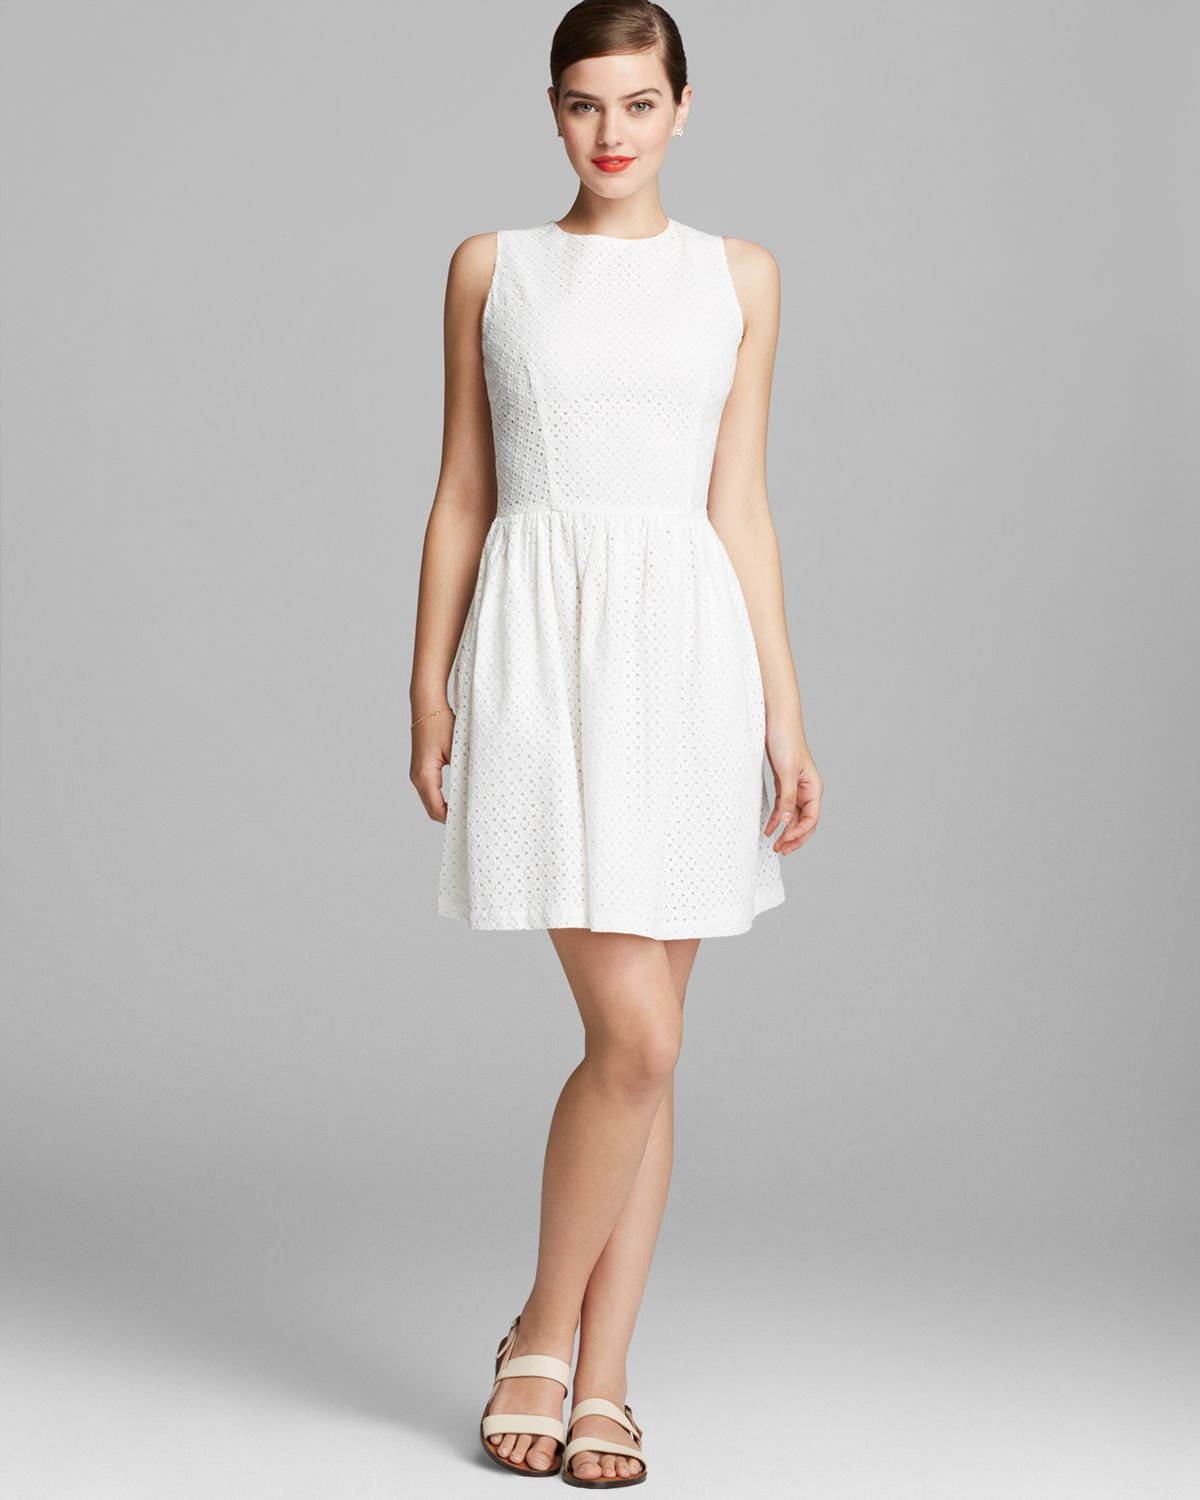 Lyst - French Connection Dress Sunflower Eyelet in White1200 x 1500